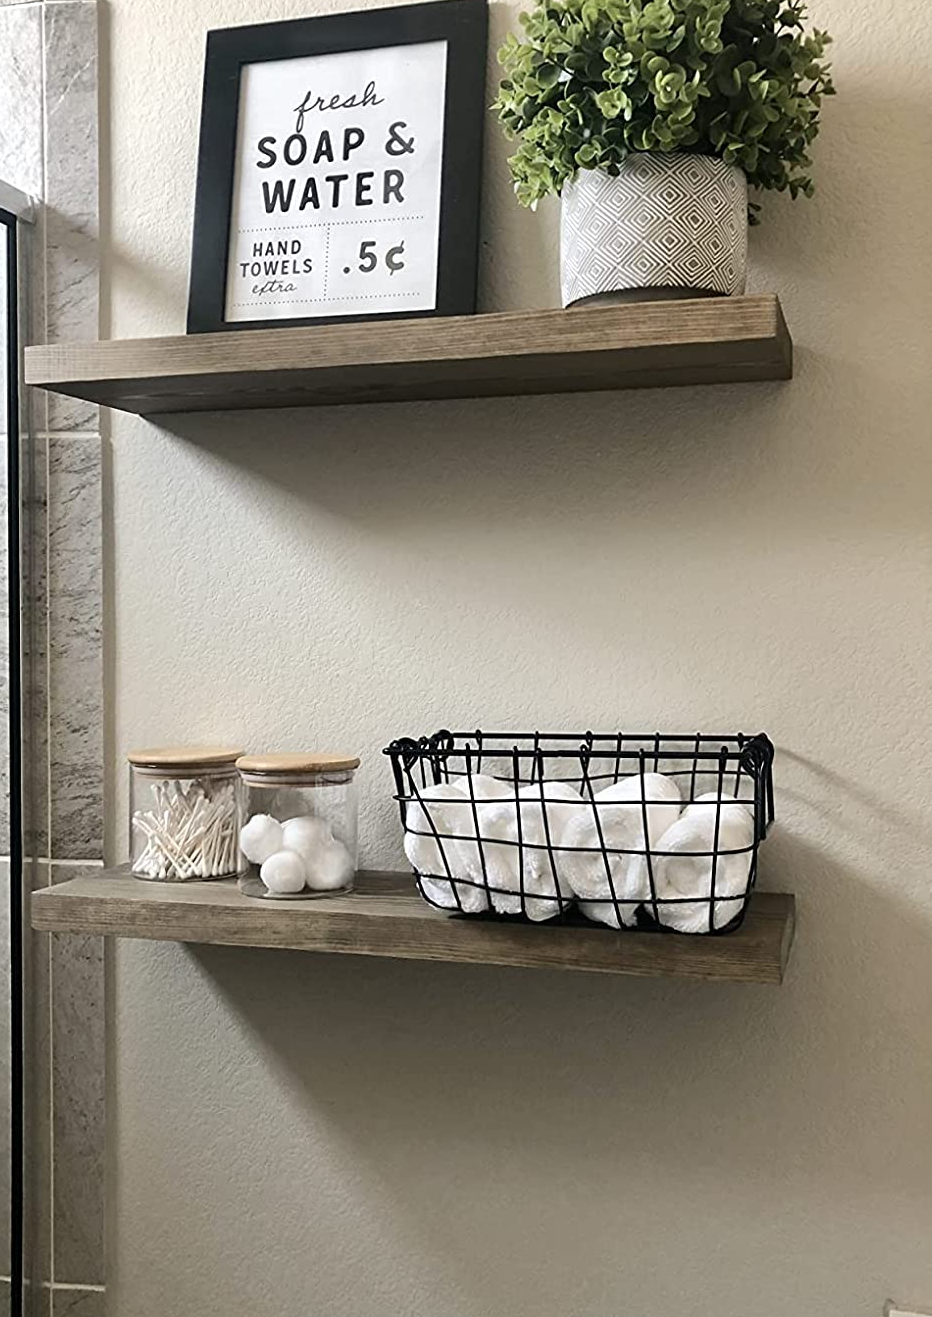 Bathroom Shelves Over Toilet, Floating Bathroom Shelves Wall Mounted with Wire Basket, Wood Floating Shelf for Wall Dcor, Bathroom Wall dcor Shelves